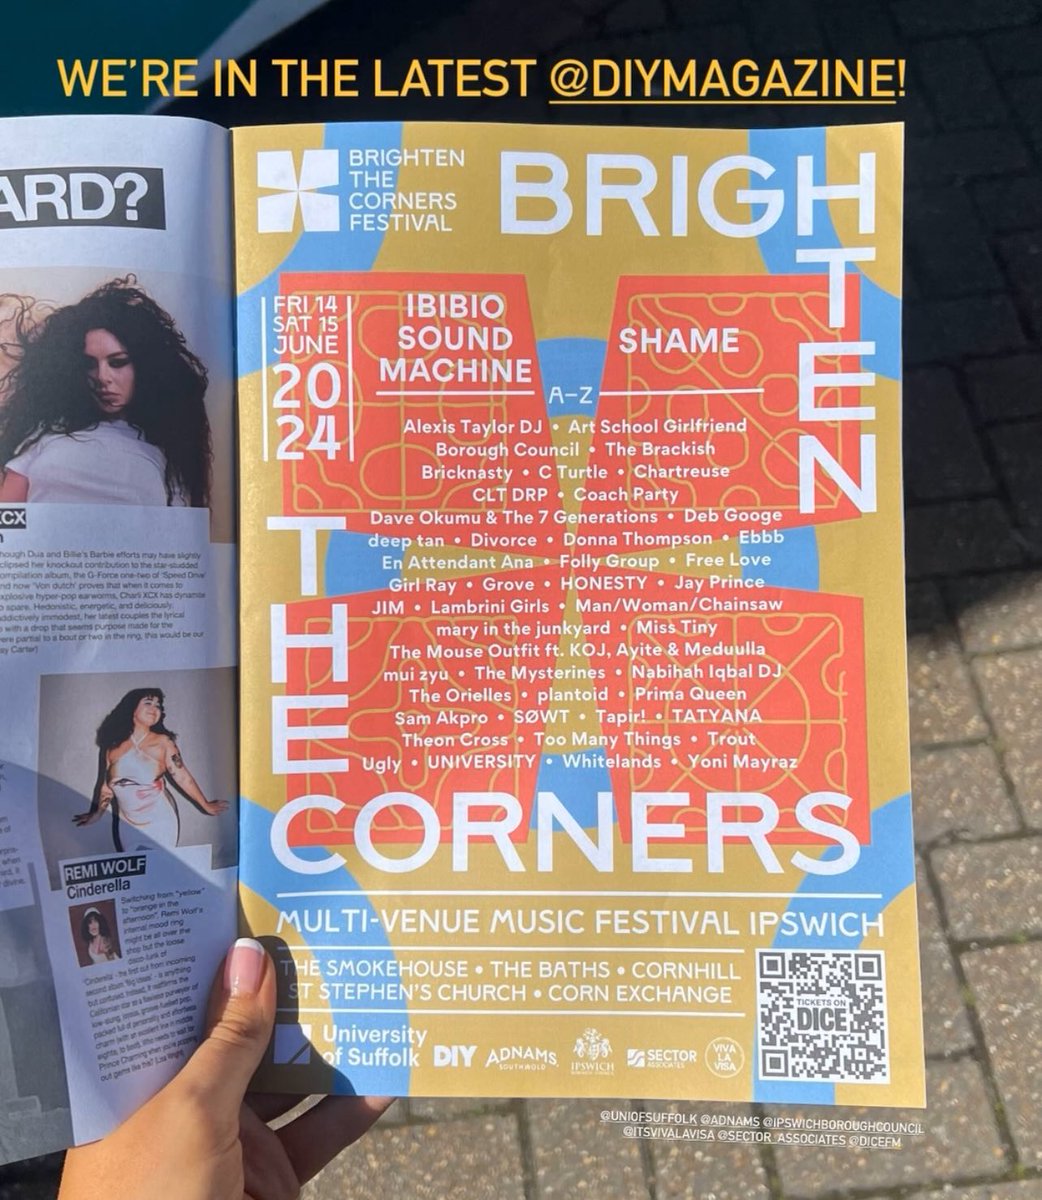 We’re featured in the latest @diymagazine! ✨ Weekend & day tickets on sale now 🎫 bit.ly/BTC24fest